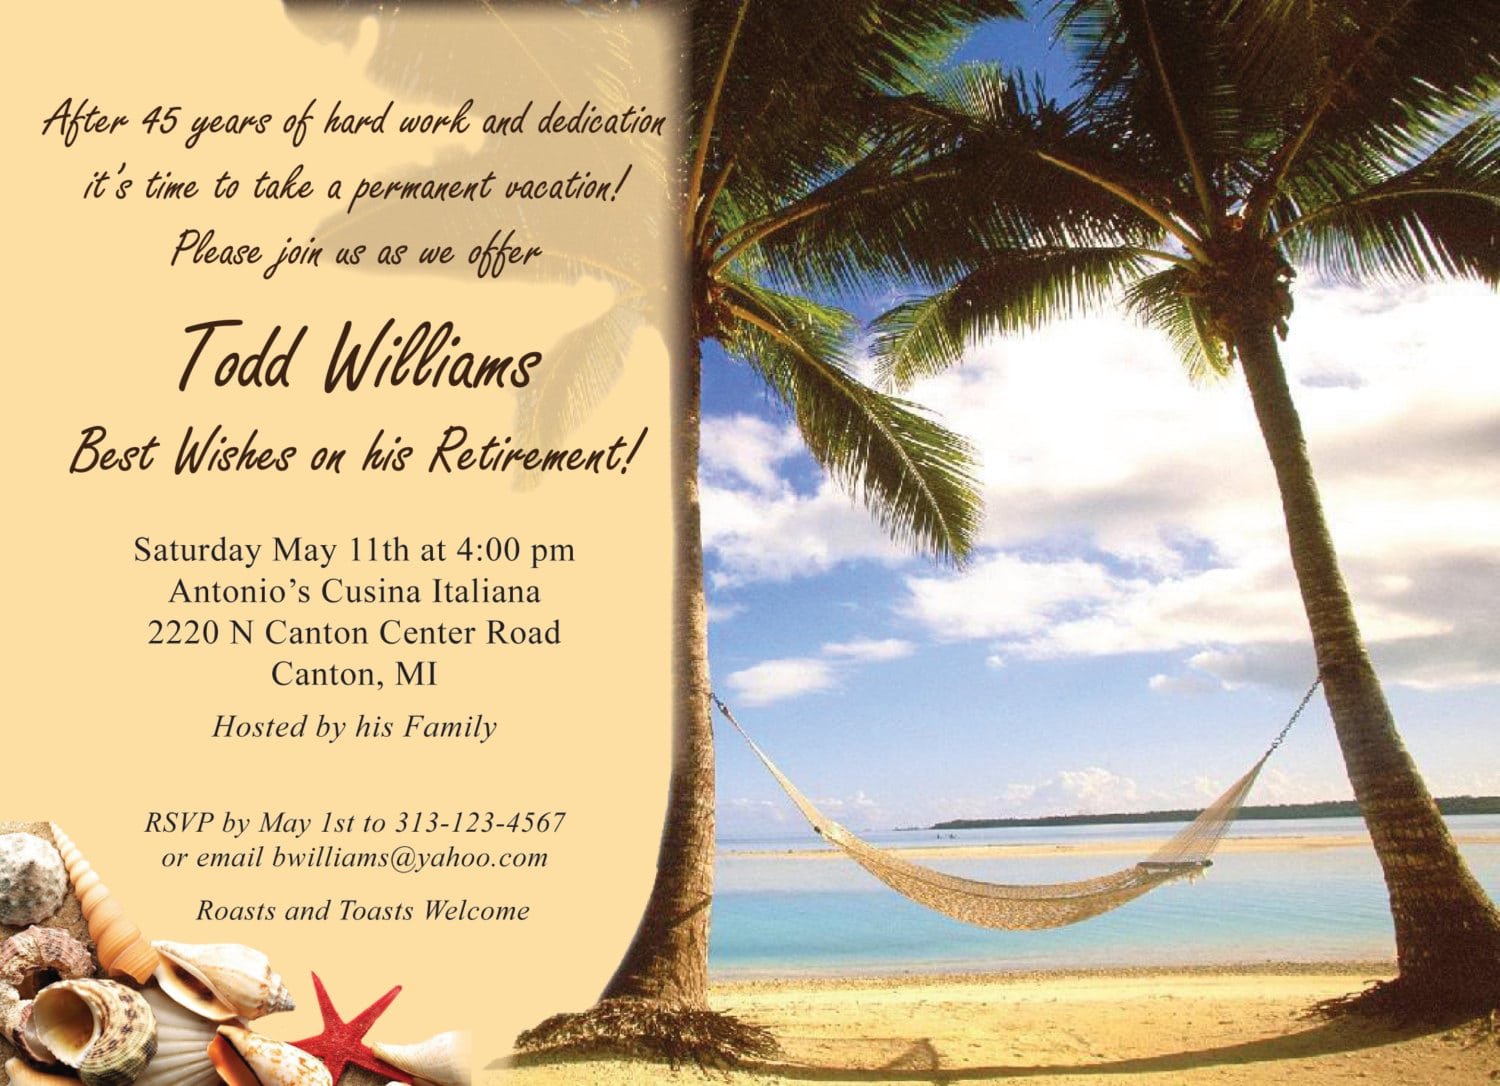 Retirement Party Invitation Sample For A Man